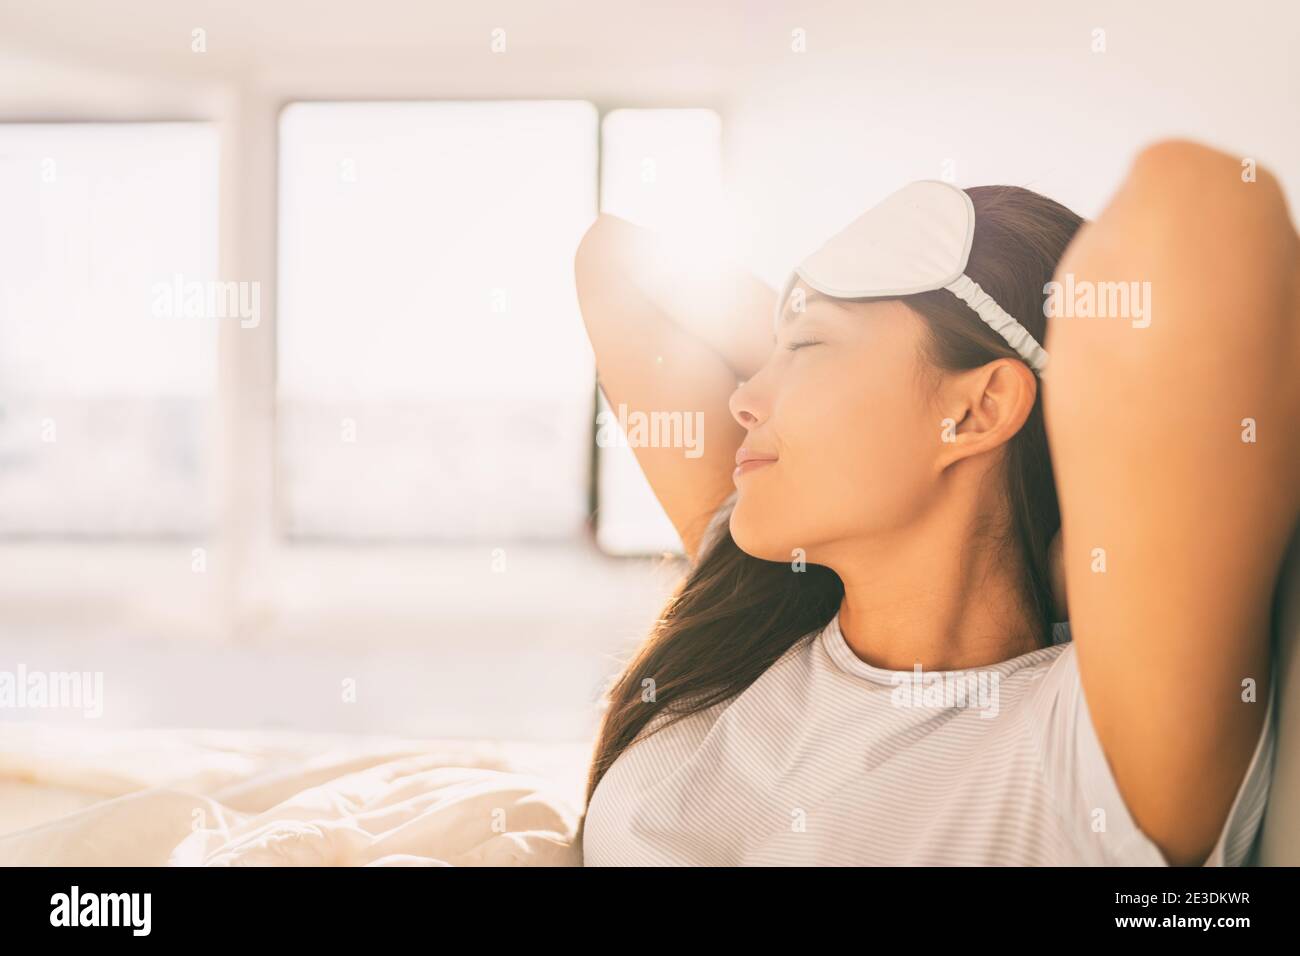 Sleeping at home woman waking up in morning sunlight stretching happy after a good night sleep feeling rested wearing eye mask. Asian girl bed sleep Stock Photo